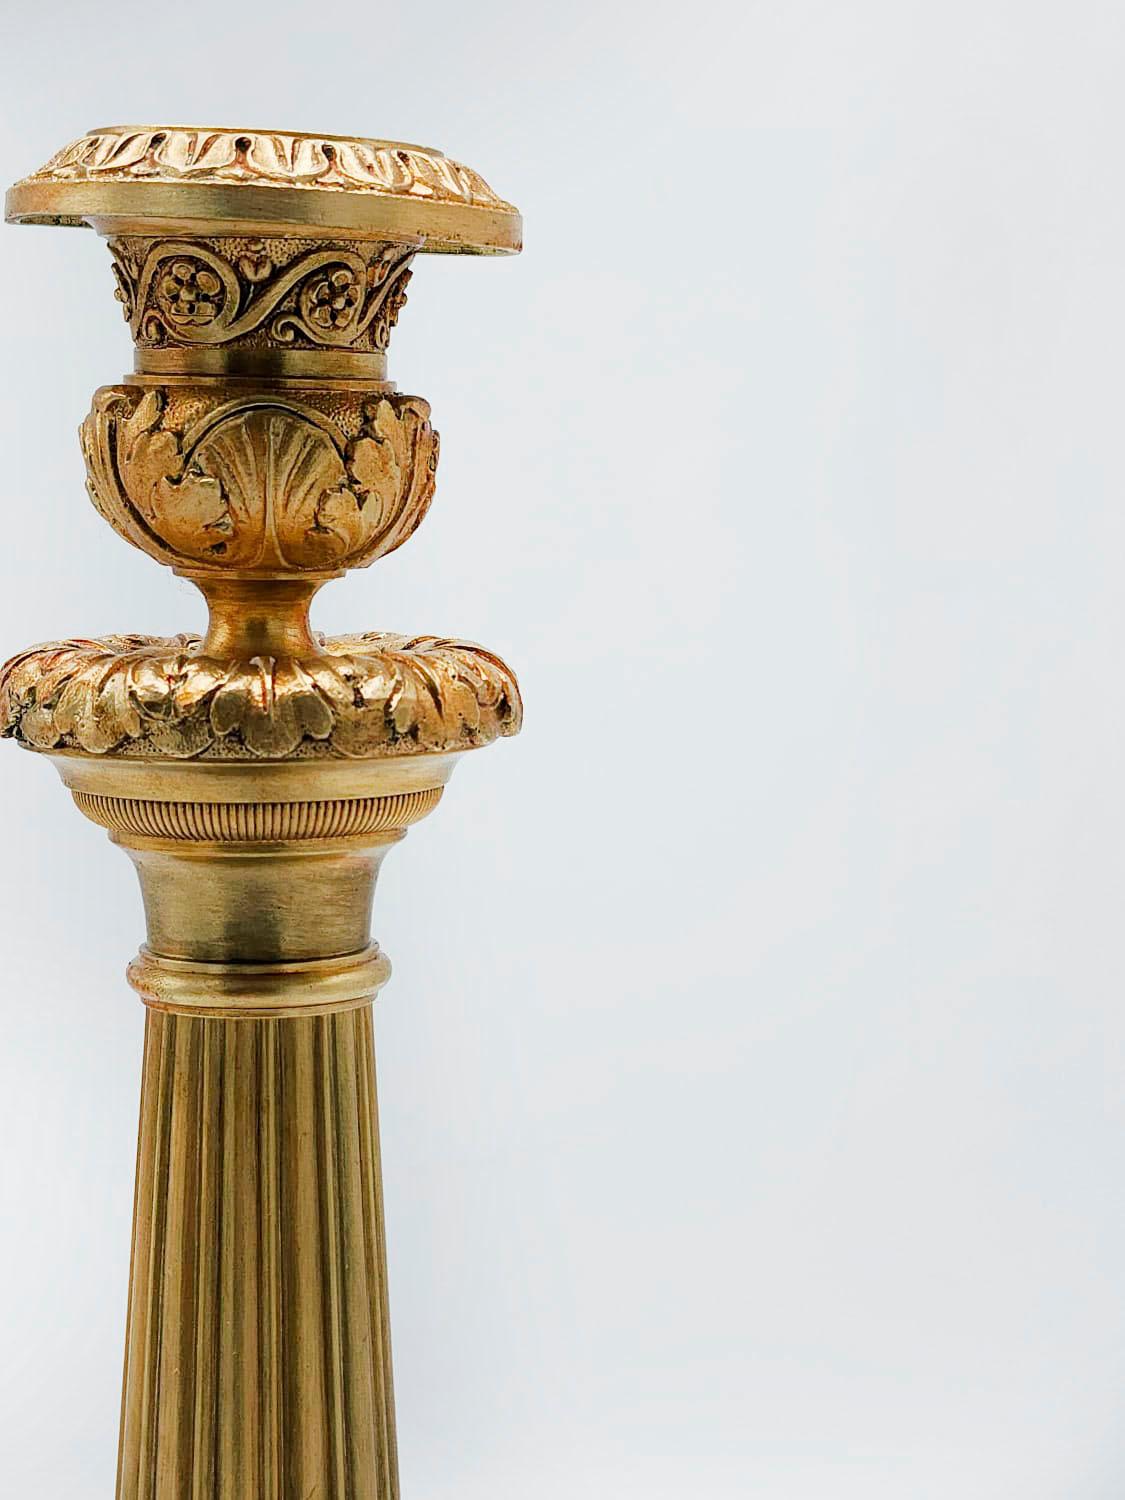 Antique Pair French Ormolu Bronce Dore Victorian Candelabros Candelabro 19th Ct

Stunning pair of heavy gauge French Ormolu gilt bronze table or mantle candle holders, of chiseled cast quality and generous height proportions.

Measures: 
Heigth: